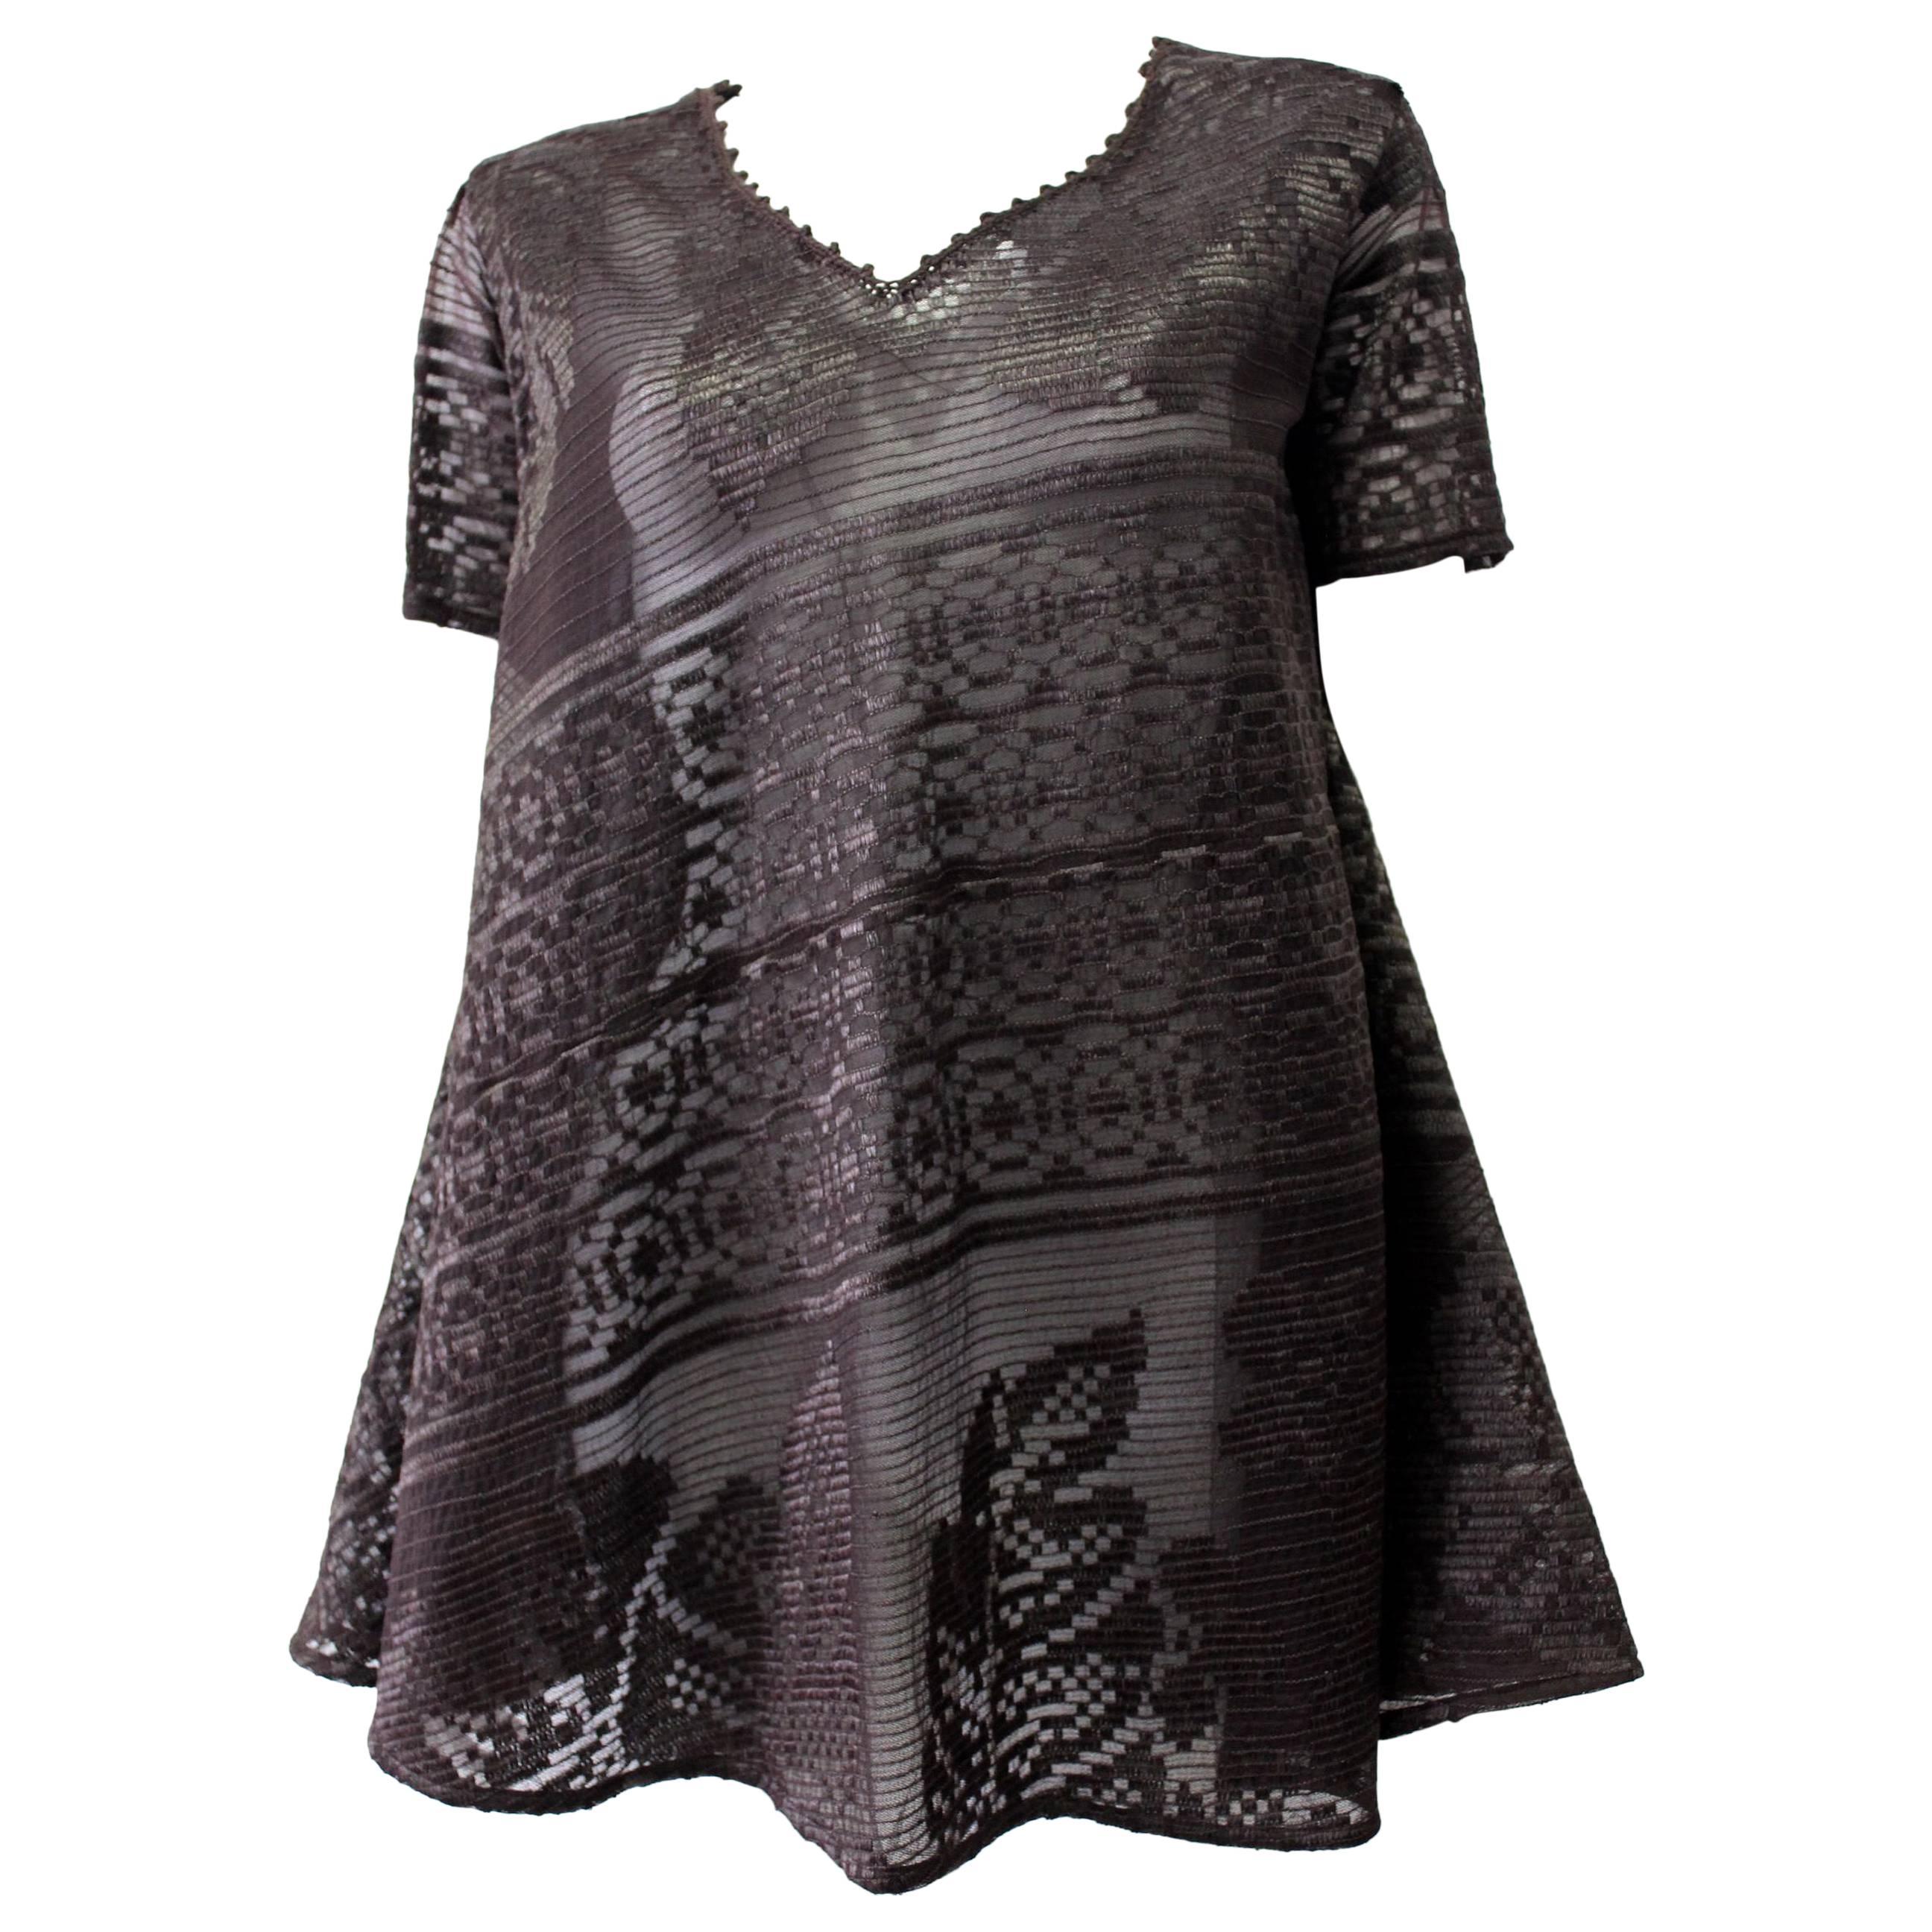 Exceptional Flared Gianfranco Ferre Chocolate Brown Lace Tunic Top For Sale